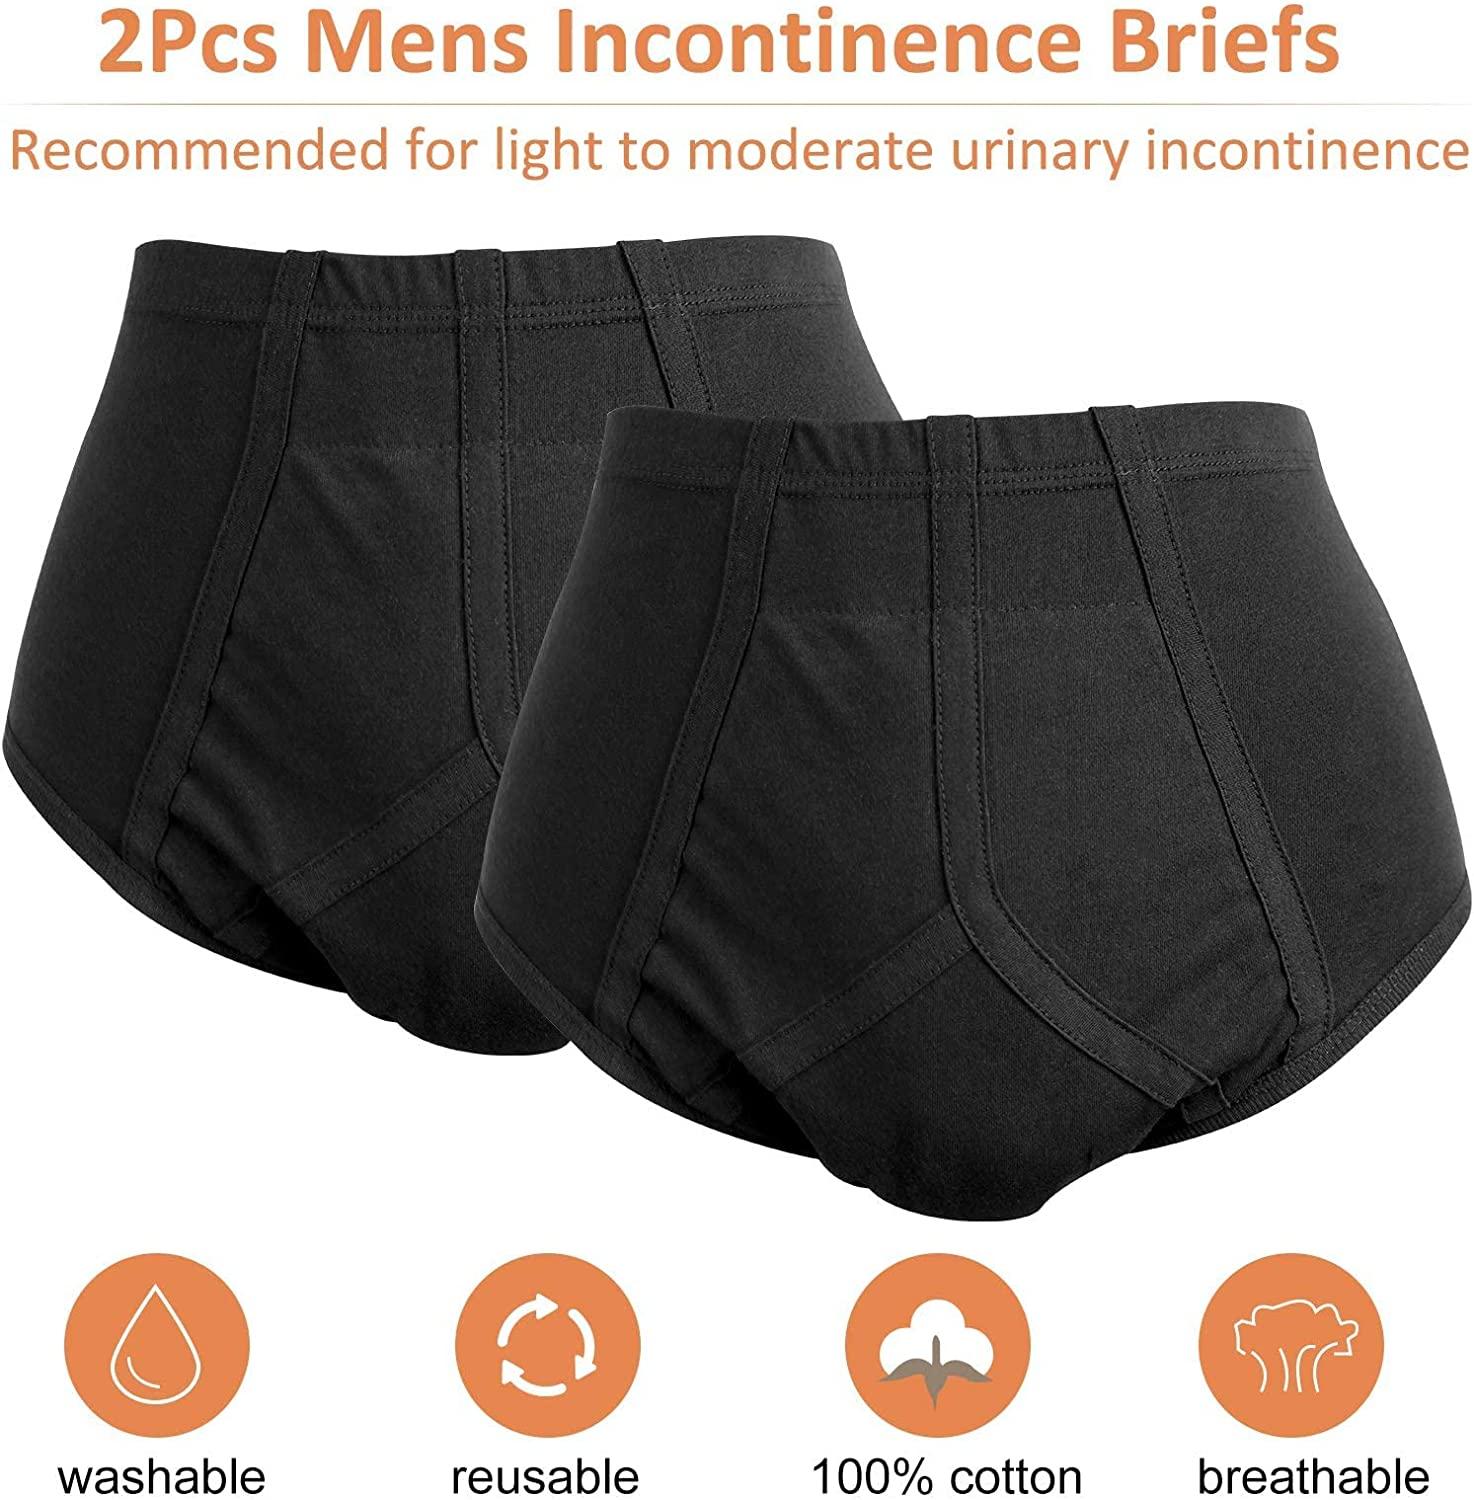  Mens Incontinence Underwear Washable Incontinence Underwear for  Men Reusable Leak Proof Men's Incontinence Briefs for Prostate Surgery,  Long Driving, Traveling, Stress, Sports, 2 Pack (Black, Medium) : Health &  Household